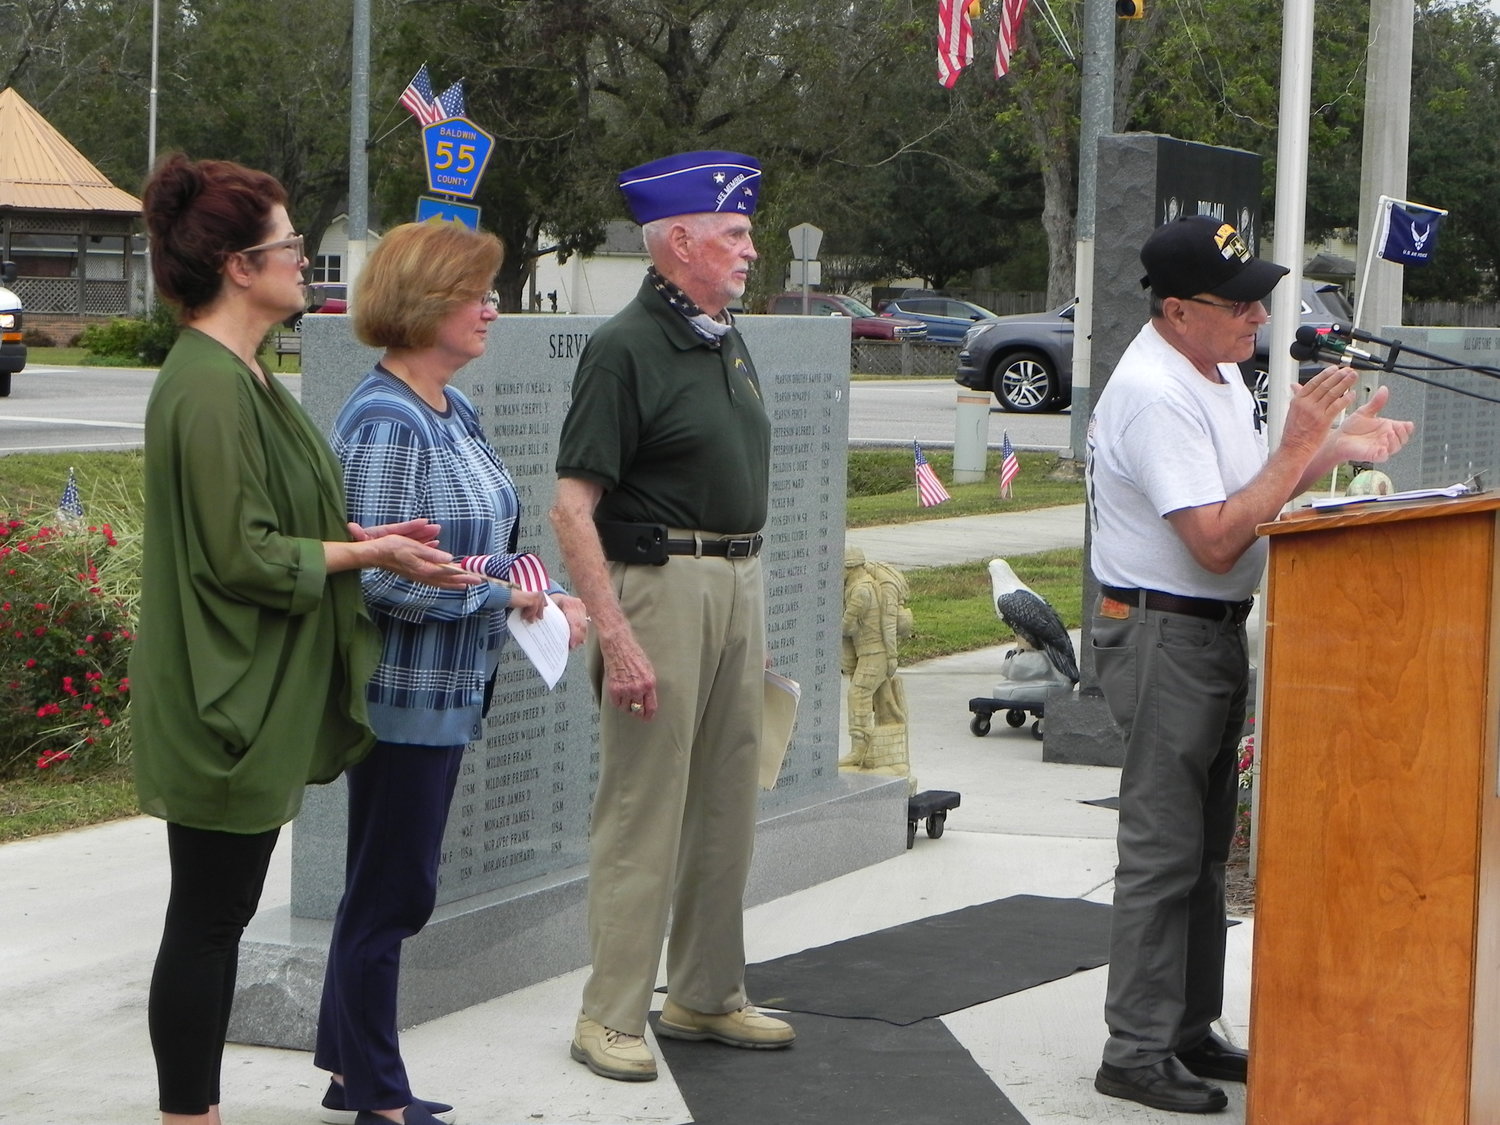 Frankie Kucera, president of the Silverhill Veterans Memorial Organization, congratulates Ed Evans, along with his daughters, Karla Dauzat and Marcia Evans, who nominated him for the award.